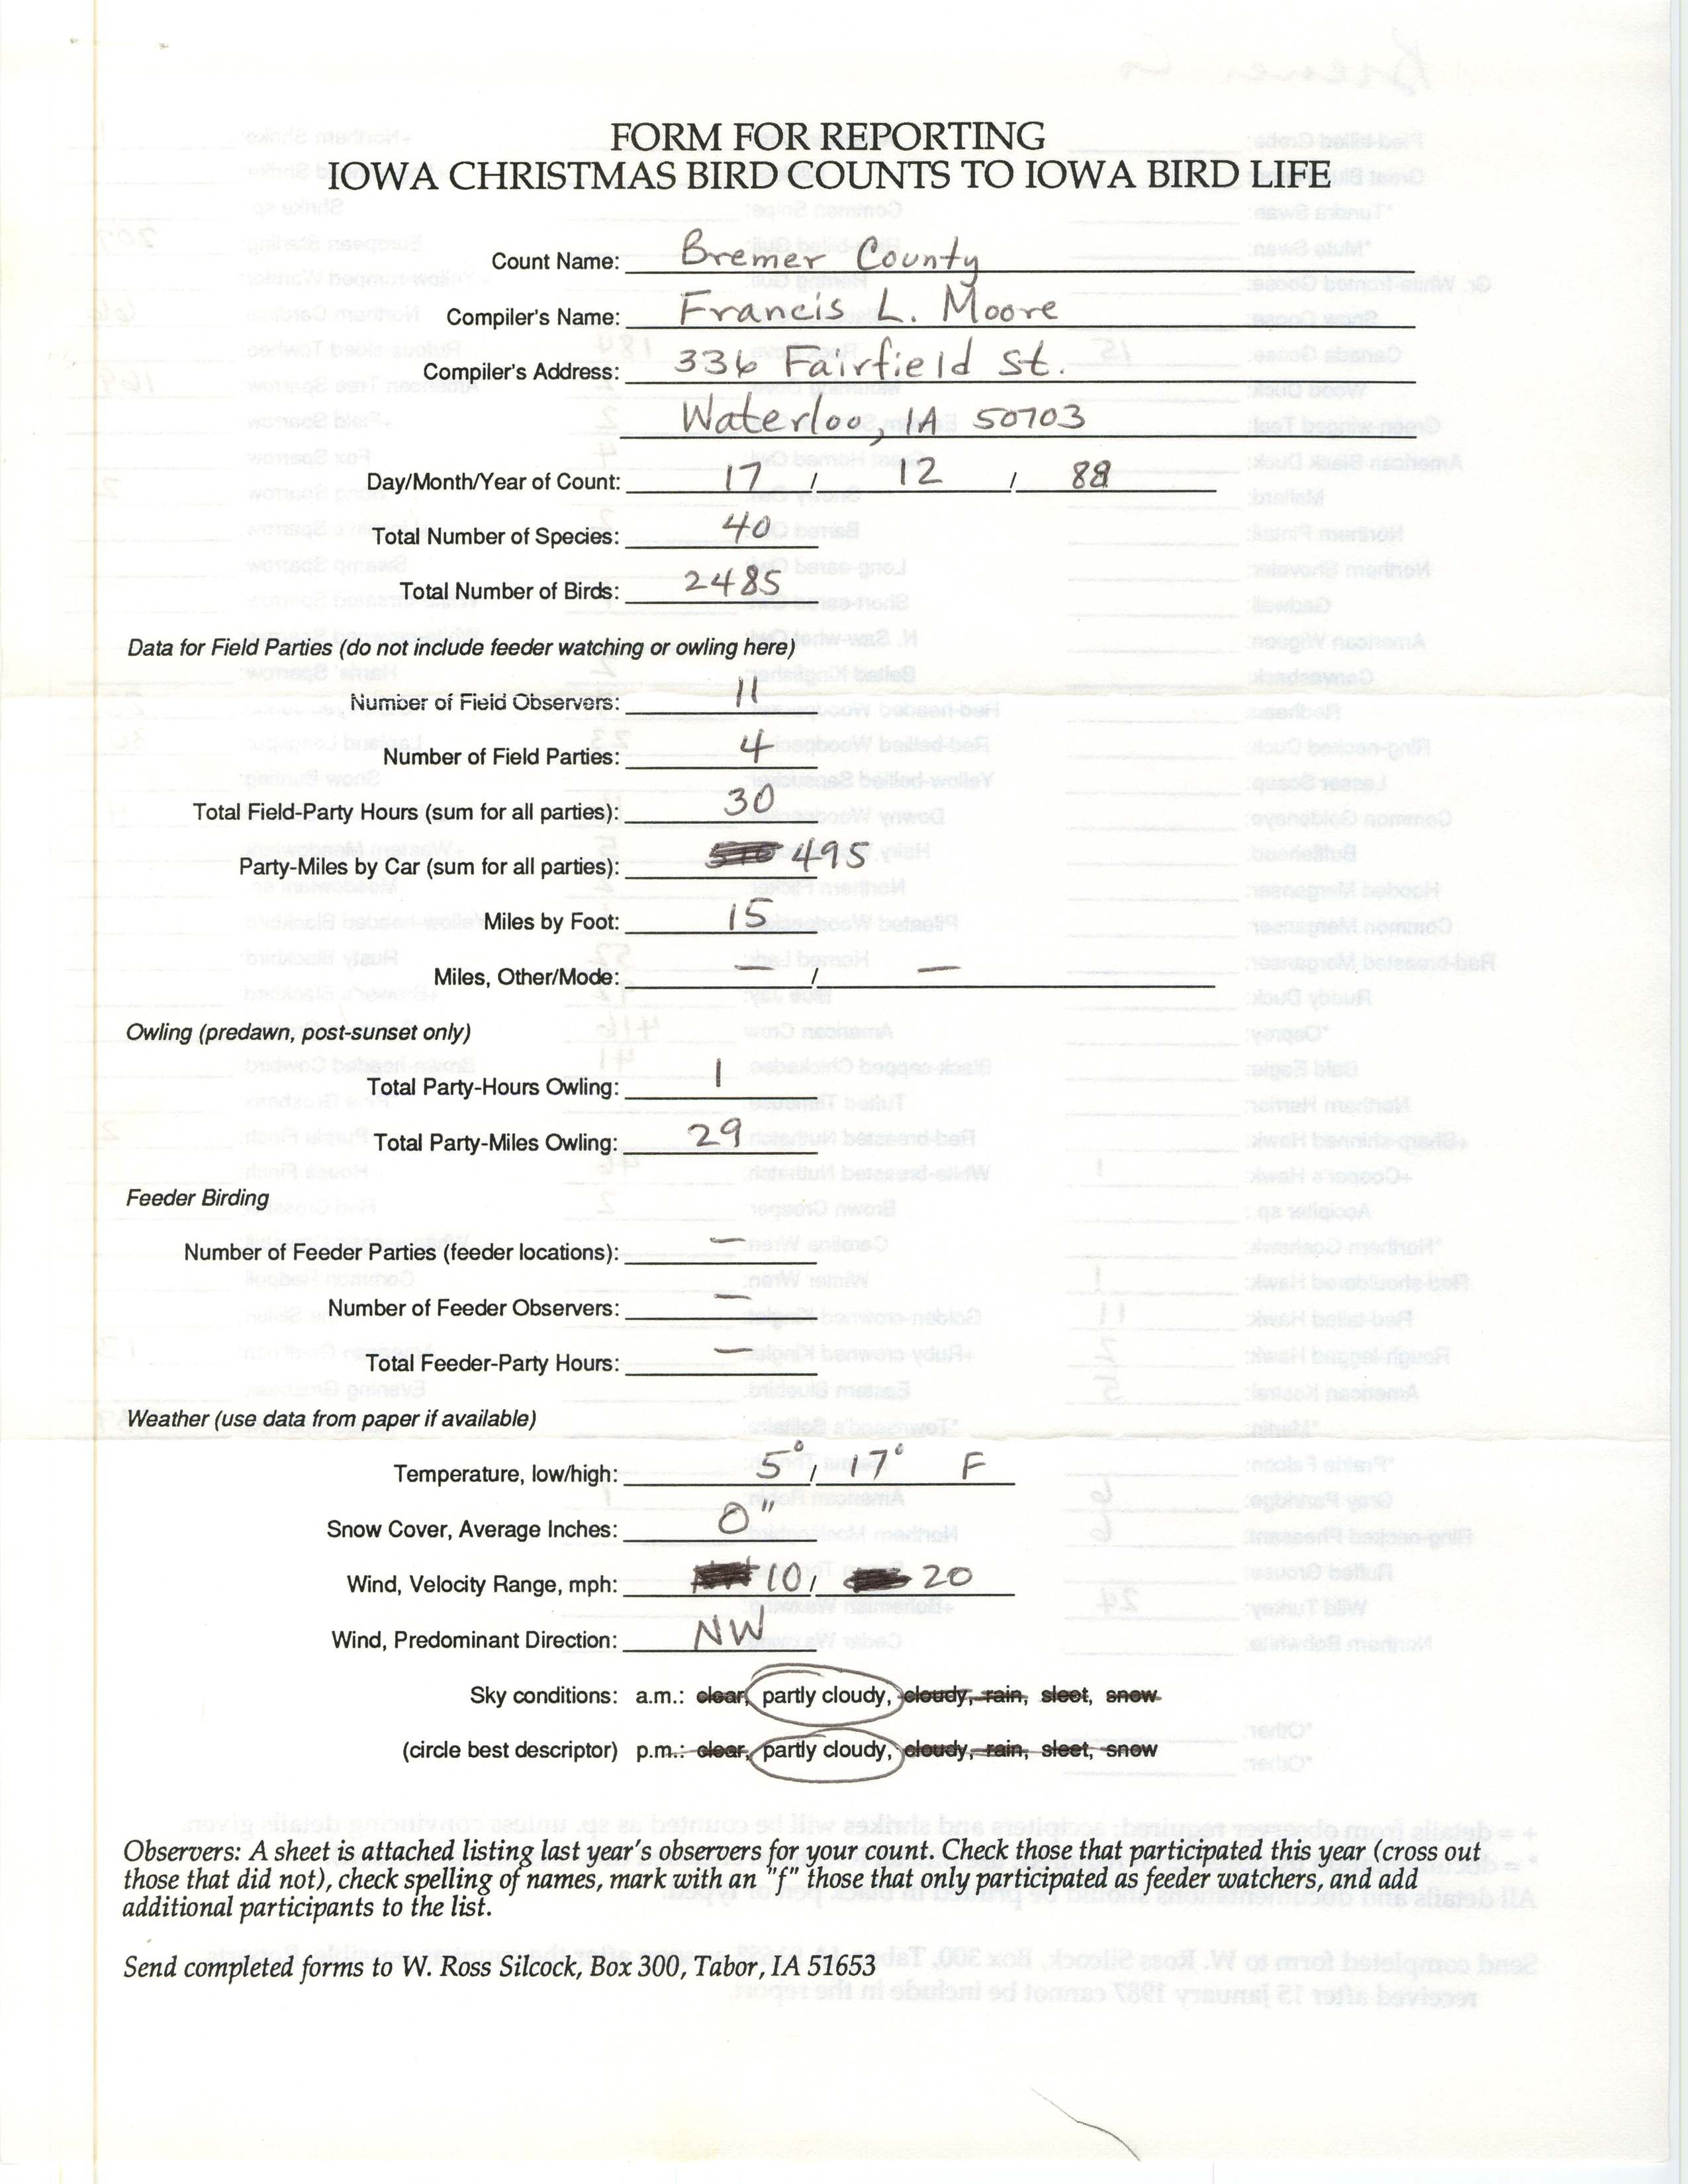 Form for reporting Iowa Christmas bird counts to Iowa Bird Life, Francis L. Moore, December 17, 1988